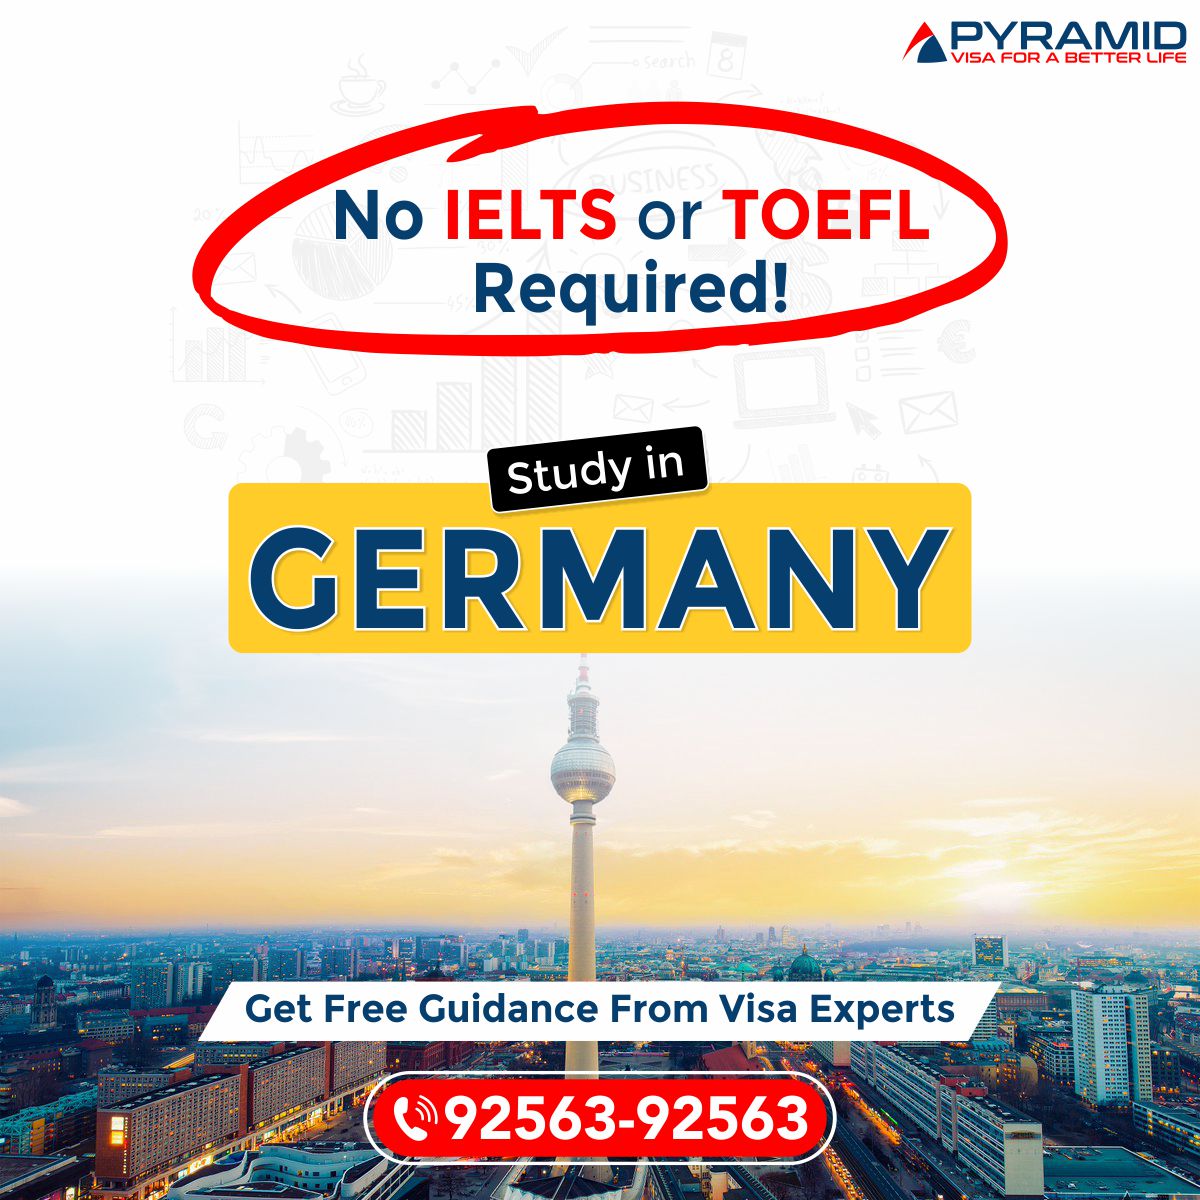 Study in #Germany🇩🇪 - No #IELTS or #TOEFL Required! 
Call📱92563-92563 to get complete guidance from our visa experts for Free!
#StudyinGermany #GermanyStudyVisa #WithoutIELTSGermany #InternationalStudents #CareerinGermany #StudyAbroad #PyramideServices #studygram #WithoutTOEFL